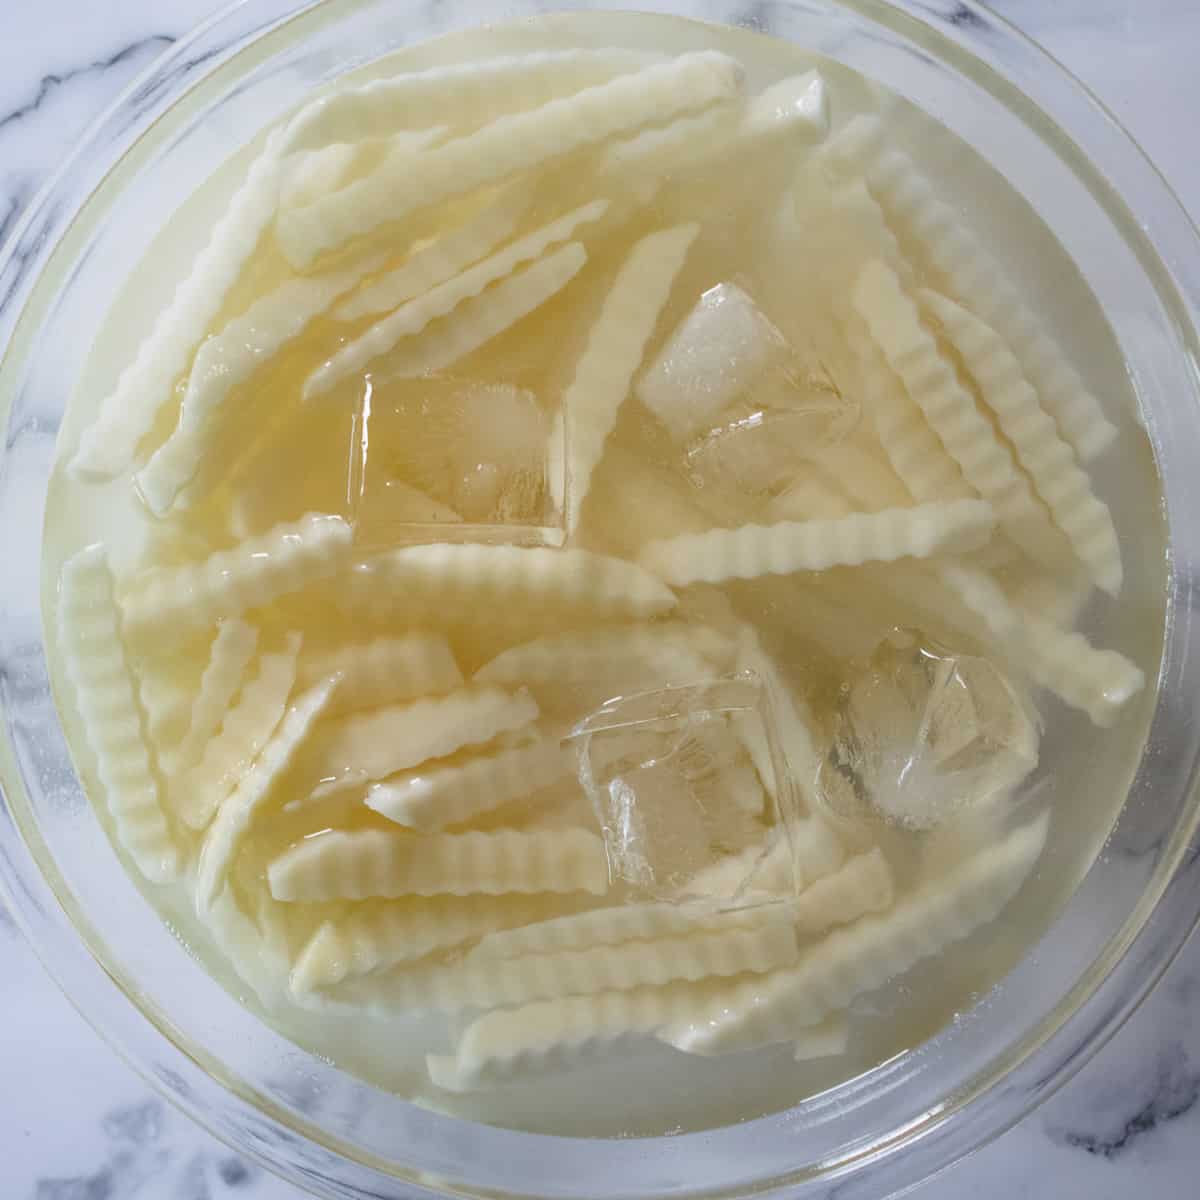 Crinkle cut French fries in a bowl of ice water